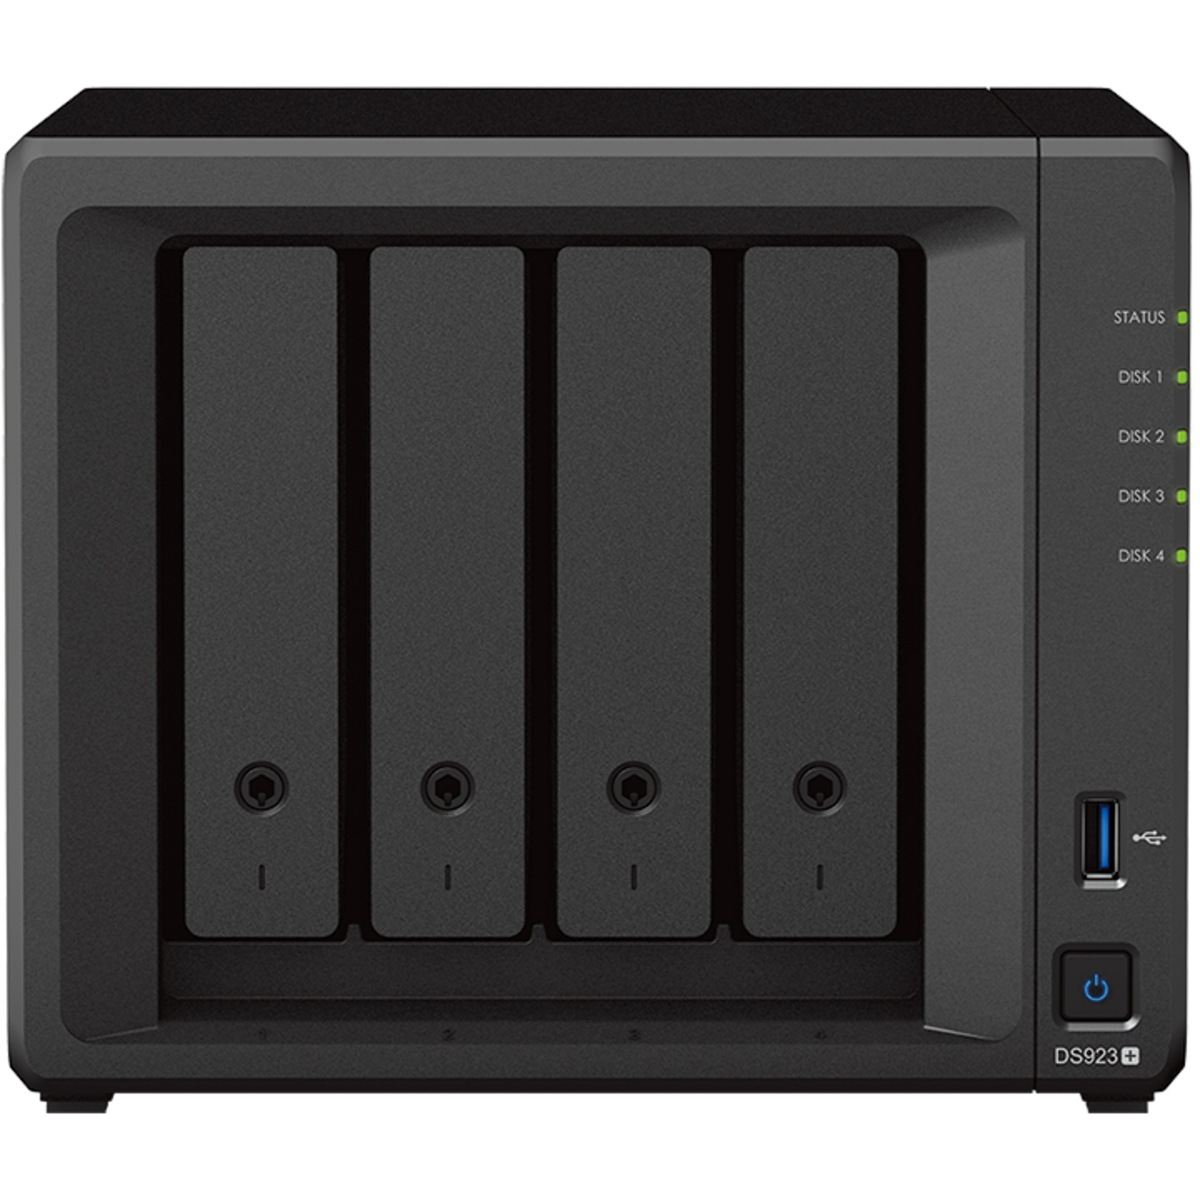 Synology DiskStation DS923+ 96tb 4-Bay Desktop Multimedia / Power User / Business NAS - Network Attached Storage Device 4x24tb Seagate EXOS X24 ST24000NM002H 3.5 7200rpm SATA 6Gb/s HDD ENTERPRISE Class Drives Installed - Burn-In Tested - ON SALE - FREE RAM UPGRADE DiskStation DS923+